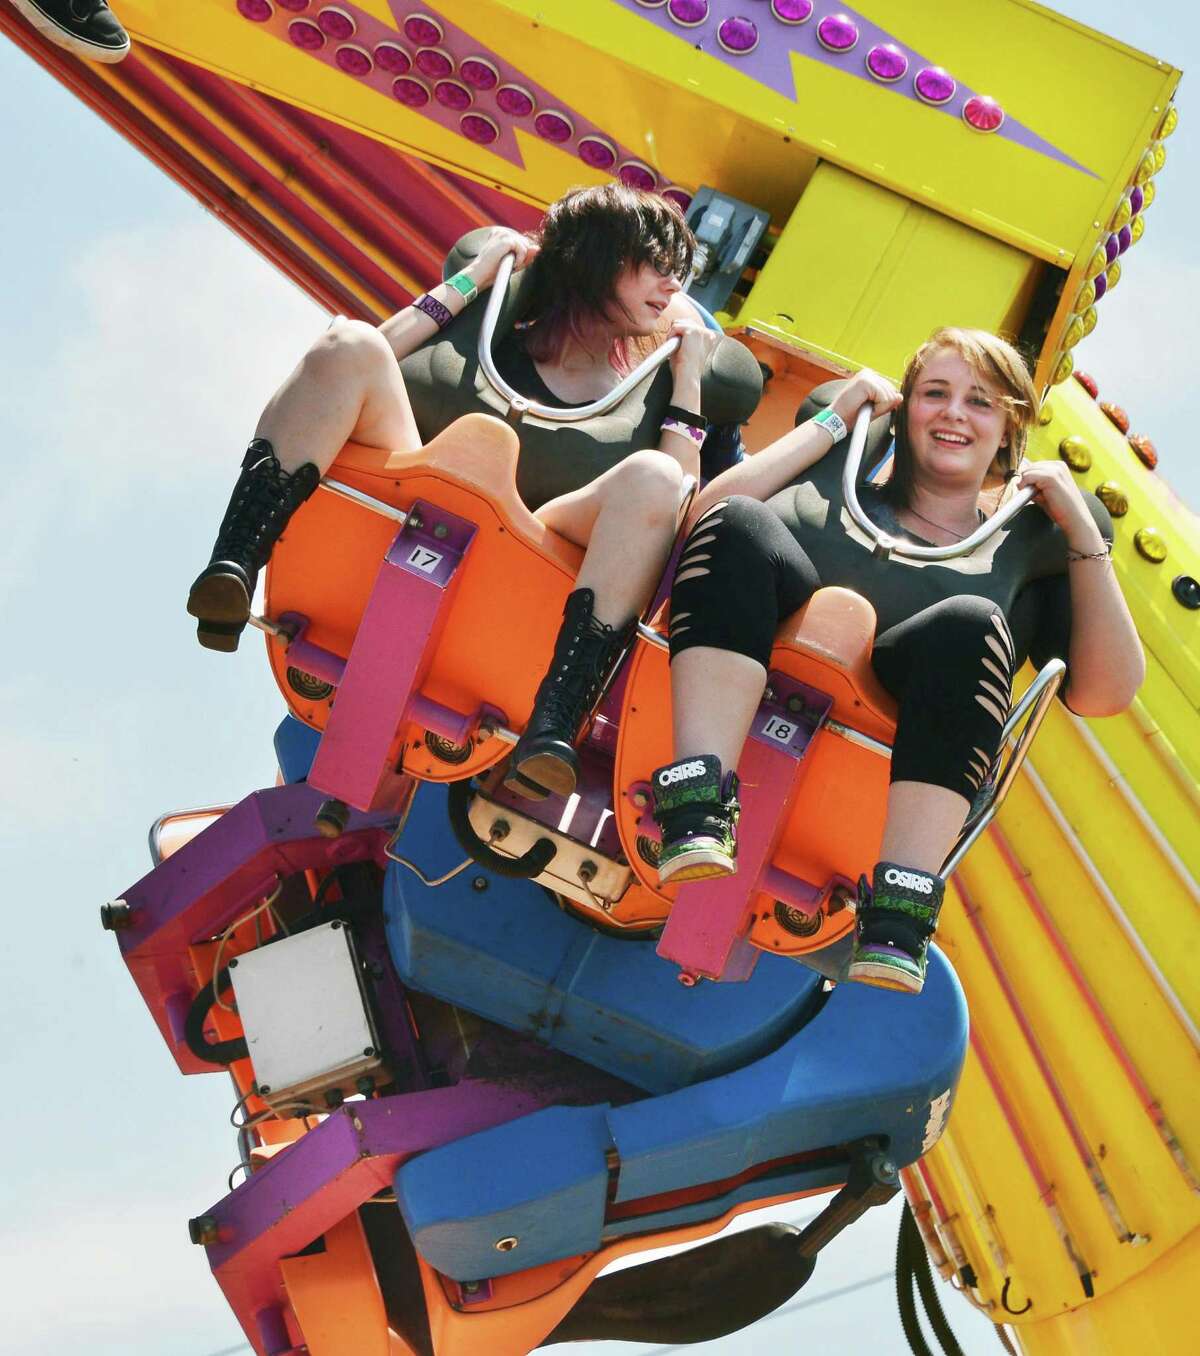 Paige Marie, 16, left, and Allyssa Daniels, 18, both of West Burke, Vt., ride the Power Surge at the Schaghticoke Fair Friday Aug. 30, 2013, in Schaghticoke, NY. (John Carl D'Annibale / Times Union)